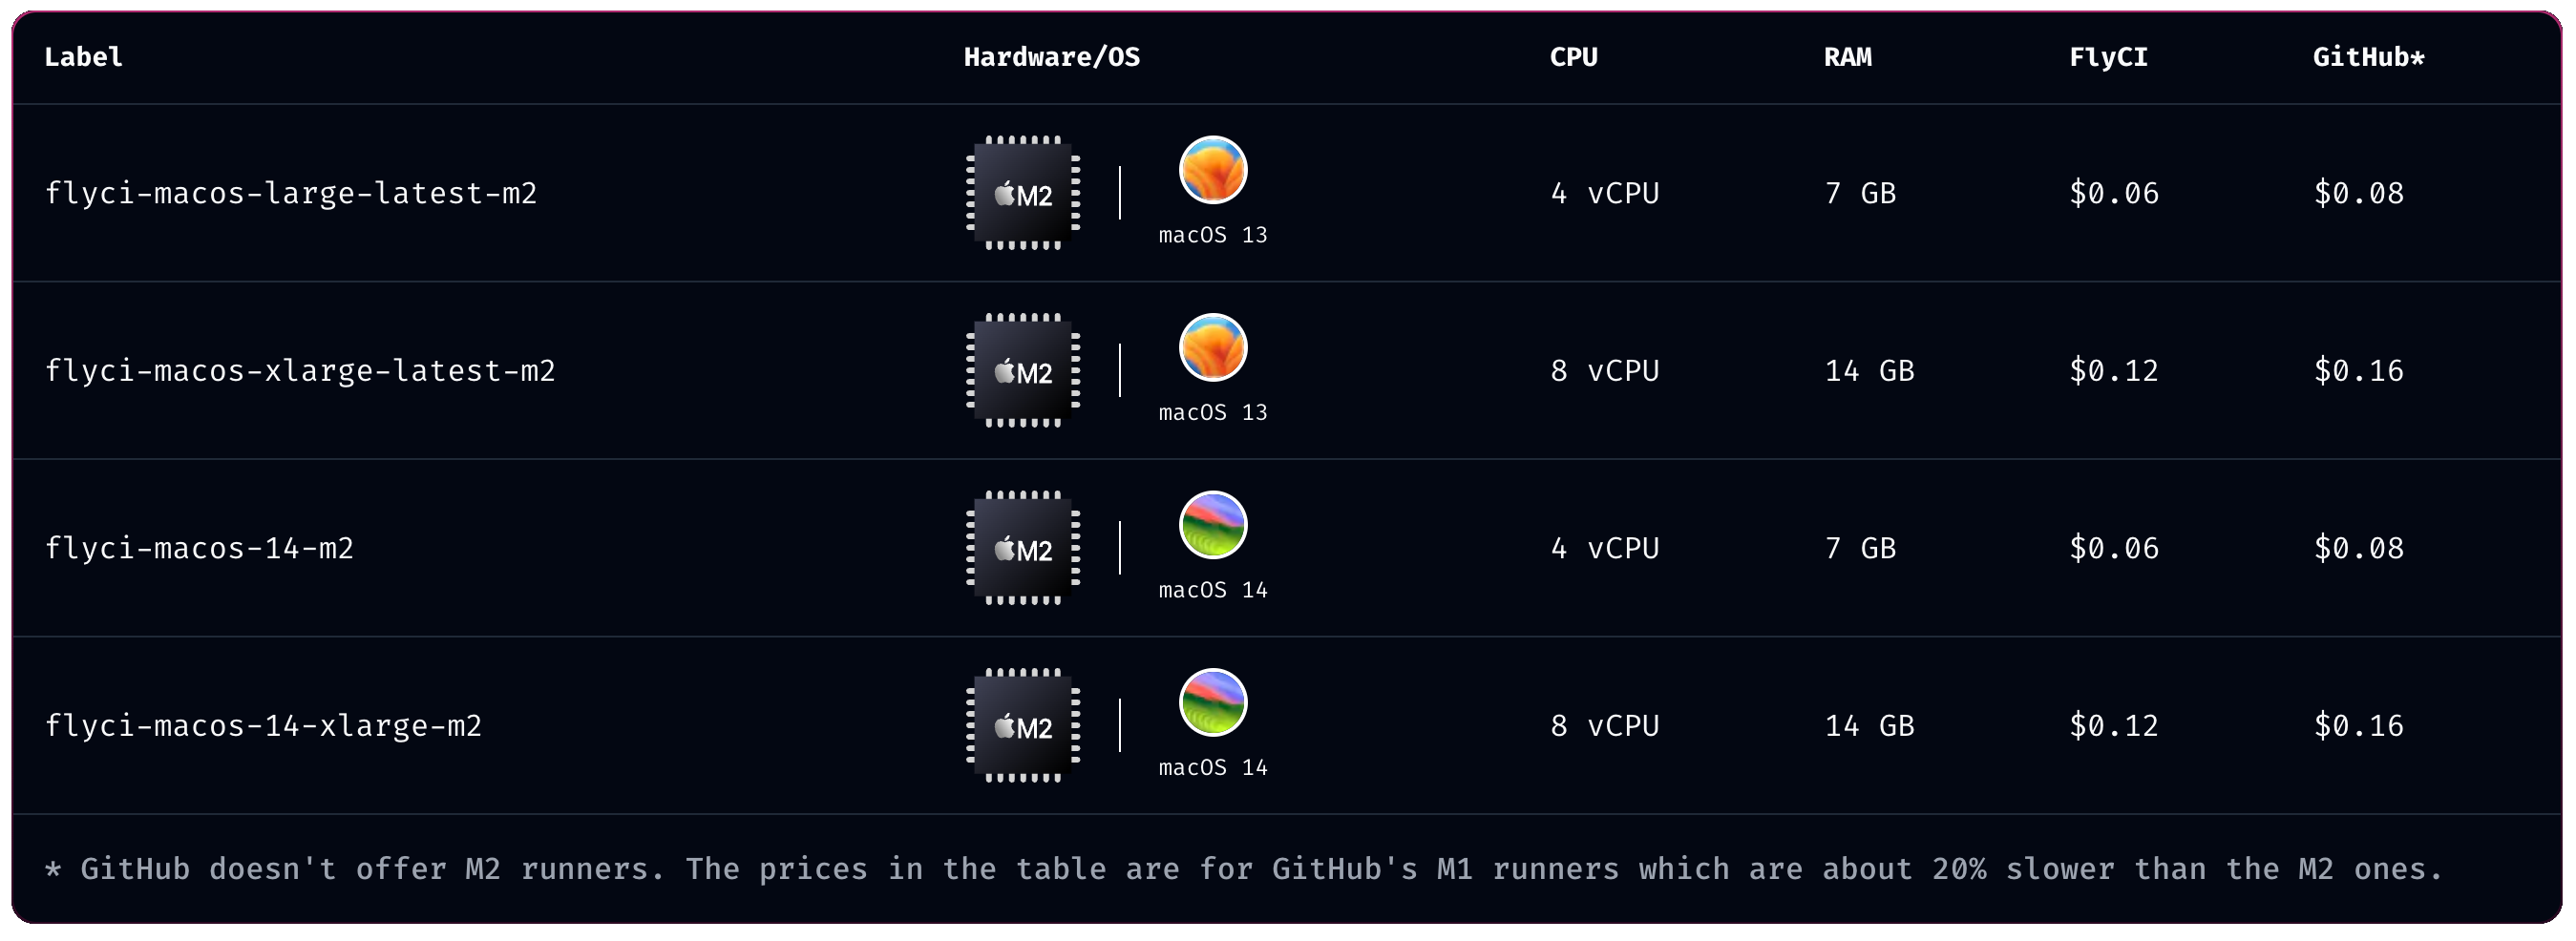 Comparison table of FlyCI's runner options, showing labels for different MacOS hardware with M2 chips, the number of vCPUs and RAM provided, and the pricing for both FlyCI and GitHub.